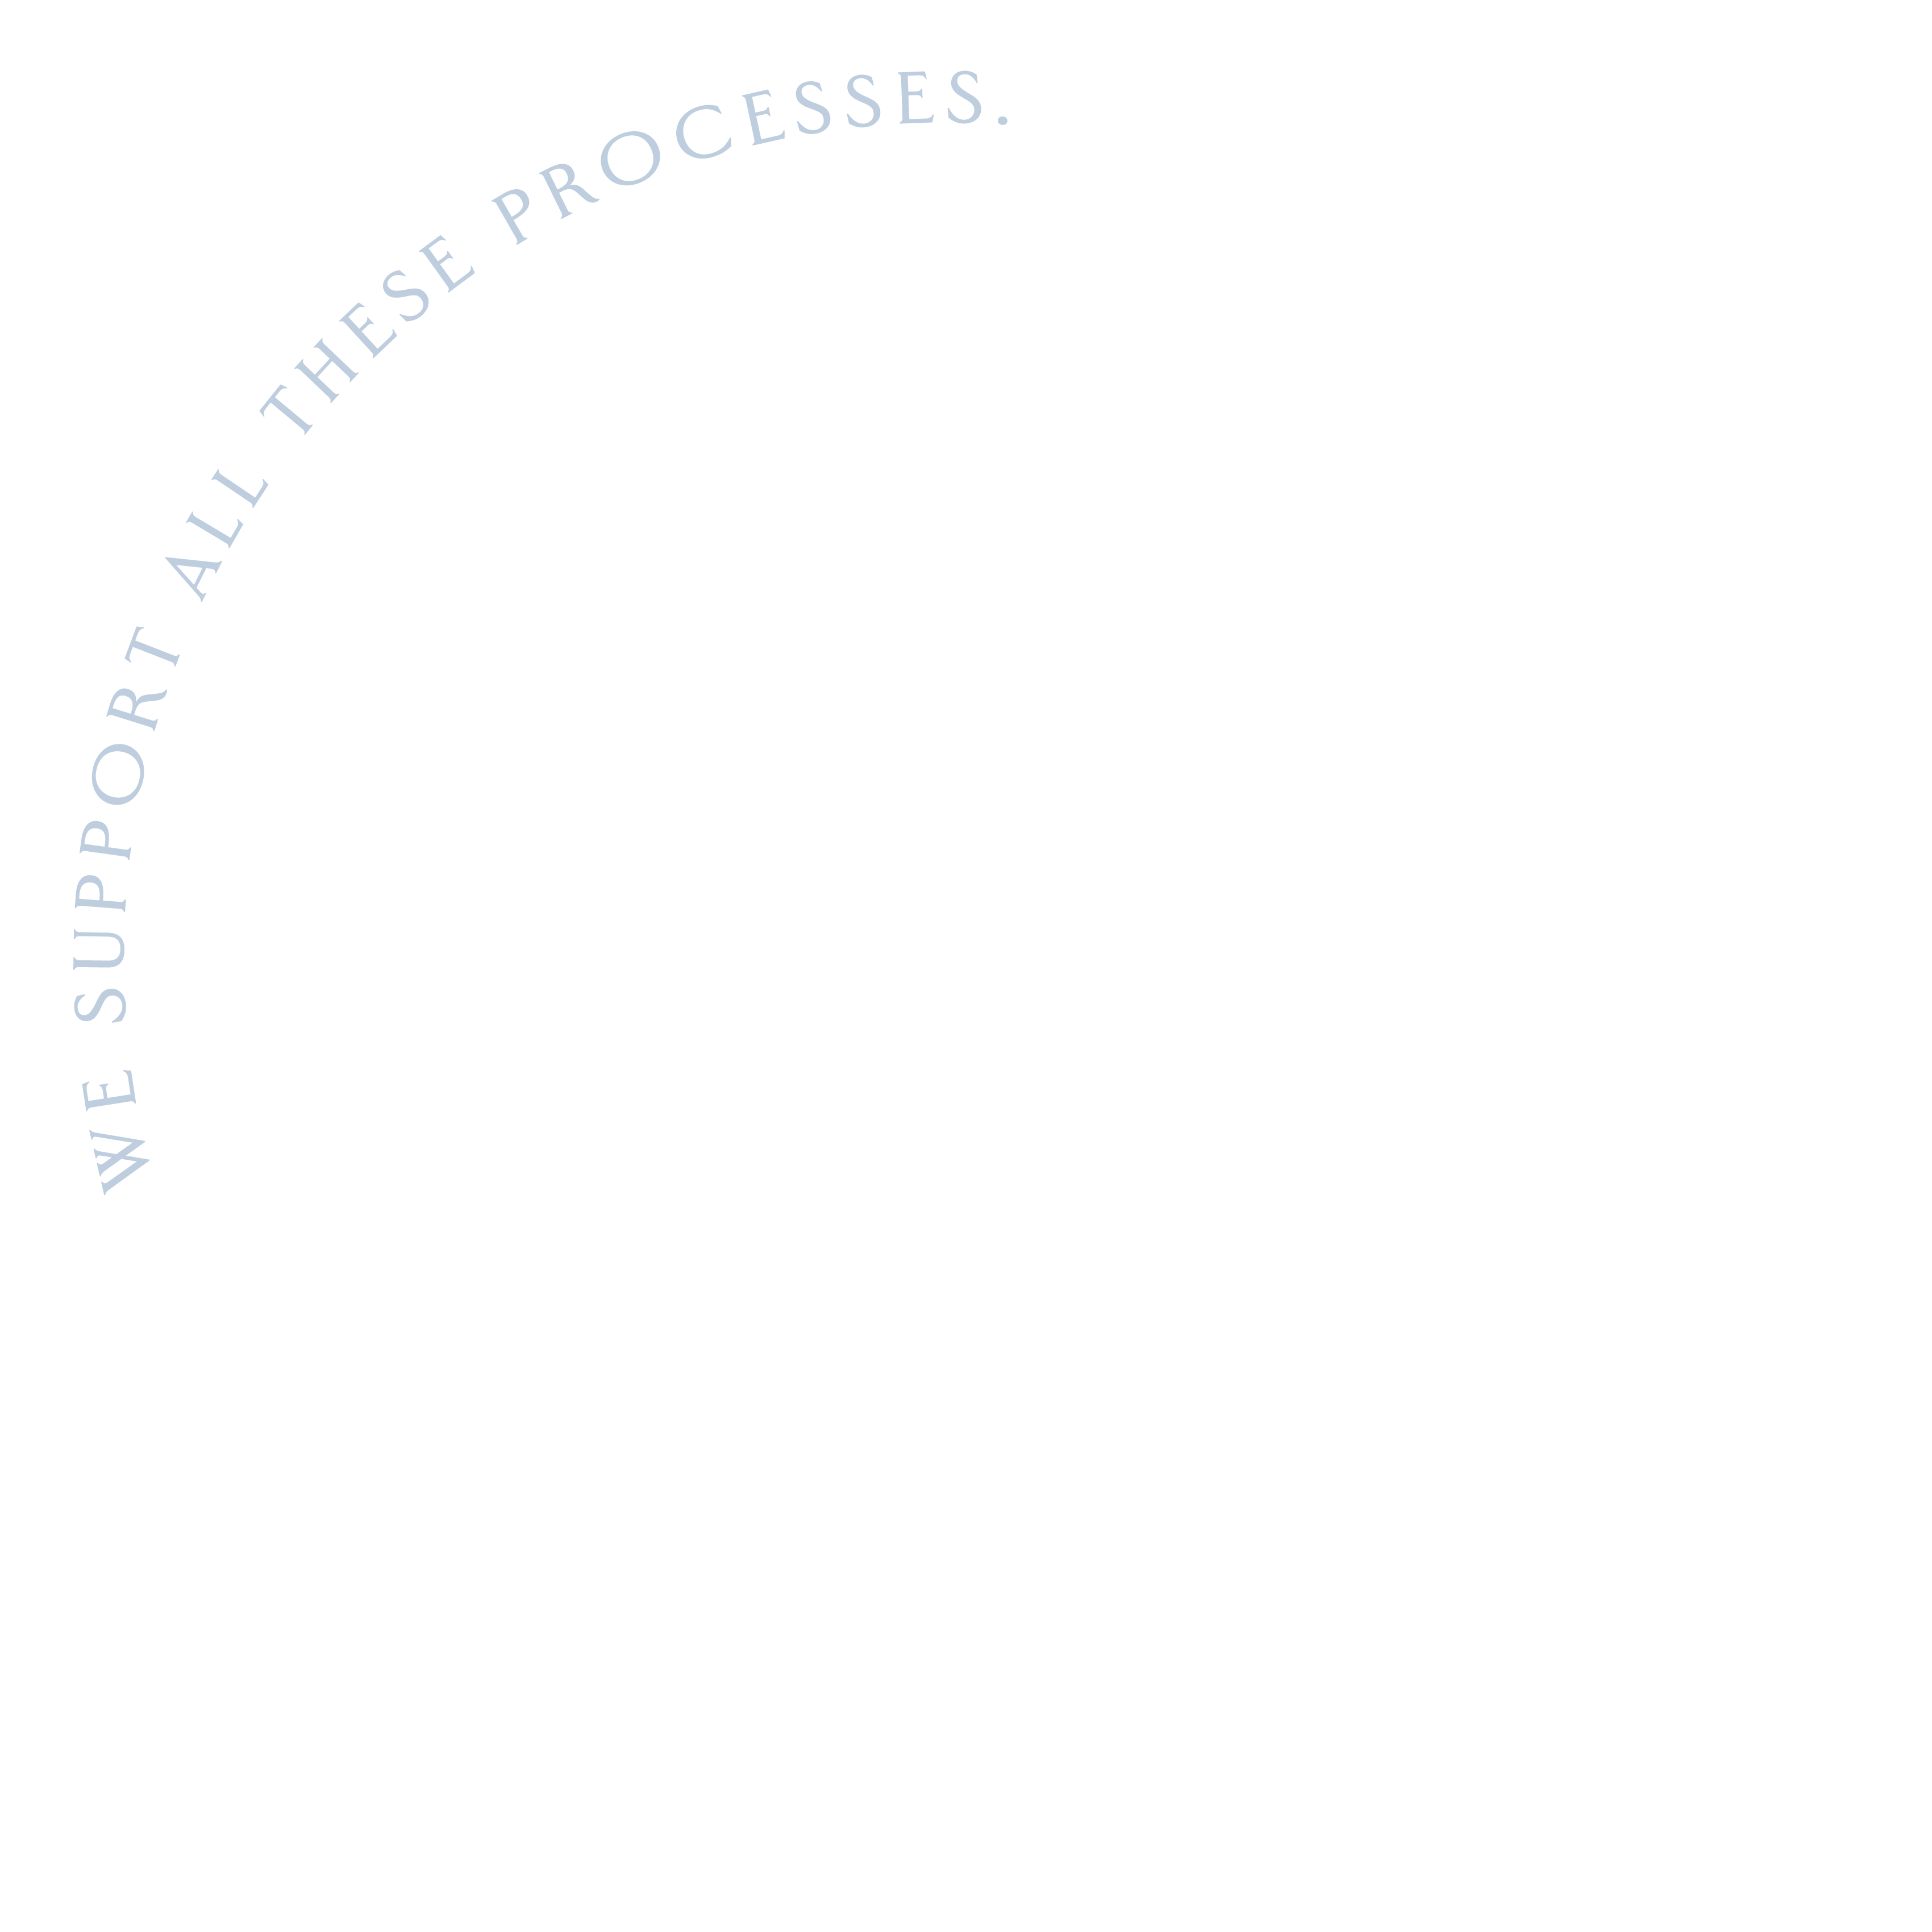 We support all these processes.